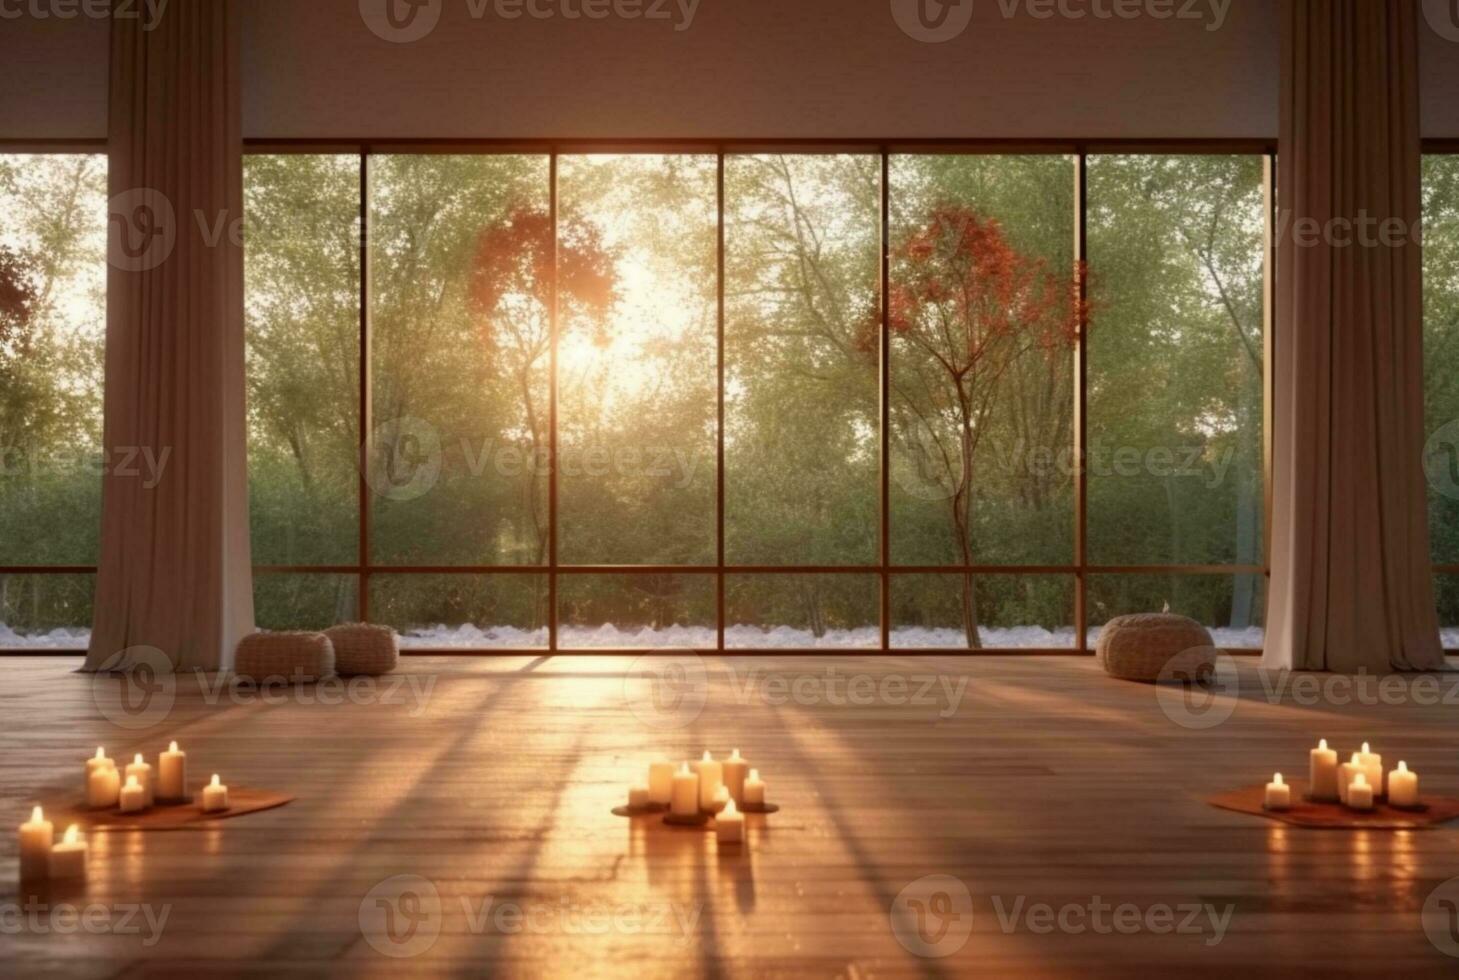 https://static.vecteezy.com/system/resources/previews/030/452/274/non_2x/empty-zen-room-or-yoga-studio-with-nature-view-from-window-and-burning-candles-on-floor-generative-ai-photo.jpg